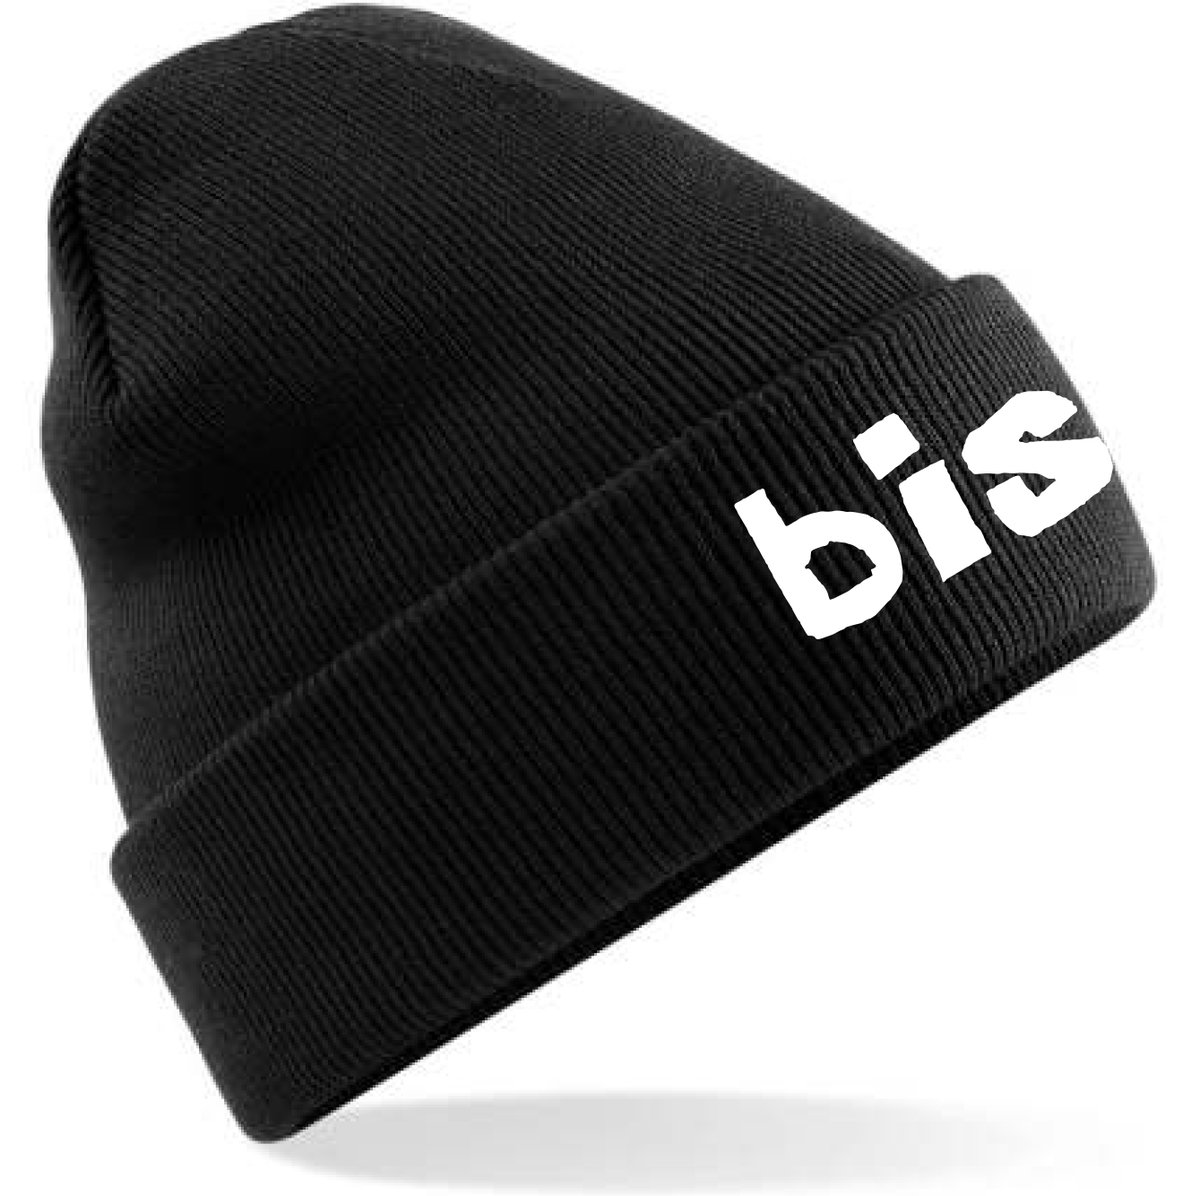 We were thinking of doing a run of embroidered bis beanies in time for winter. They're more expensive than we thought so just checking that a limited run is something you might be interested in?